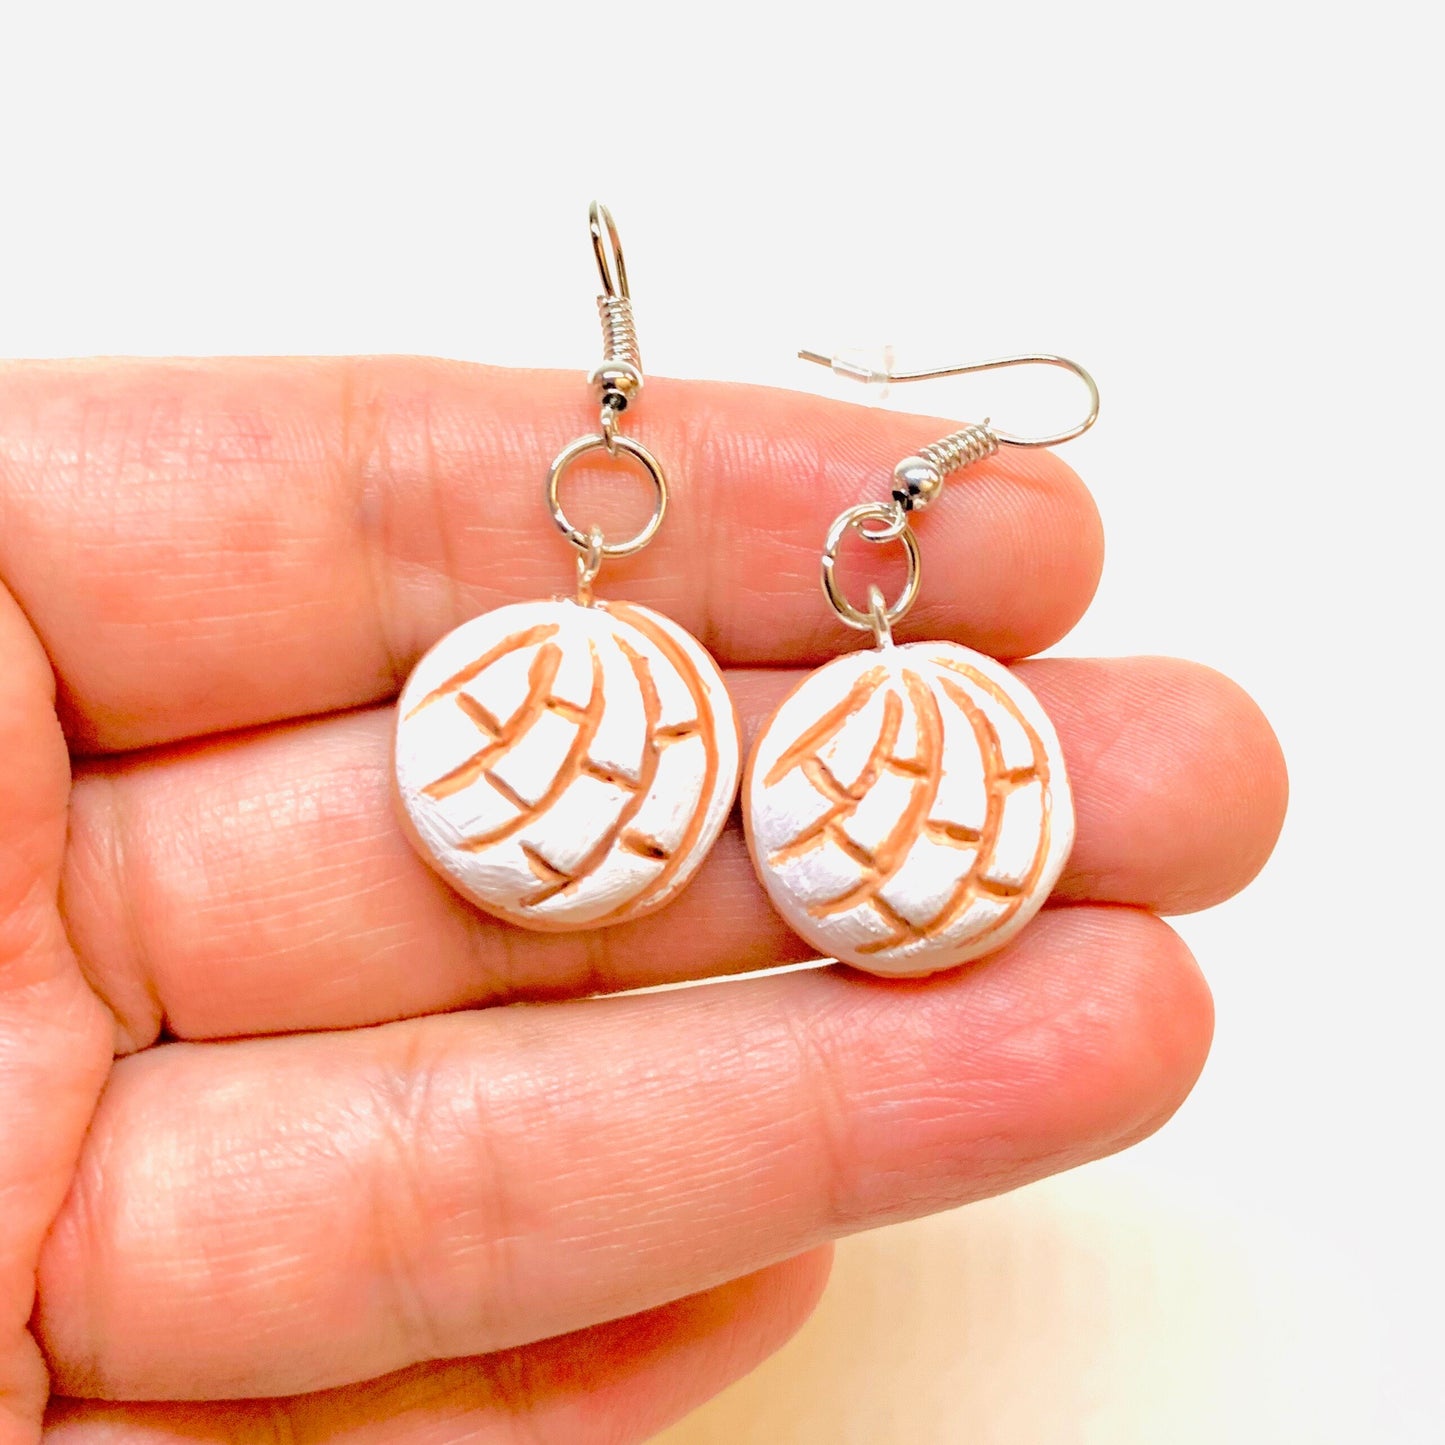 Lovely Conchitas Earrings Vanilla Concha Traditional Mexican Sweet Bread Pan Dulce Mexico FolkArt Aretes Girls Women Fashion Mujer Claywelry